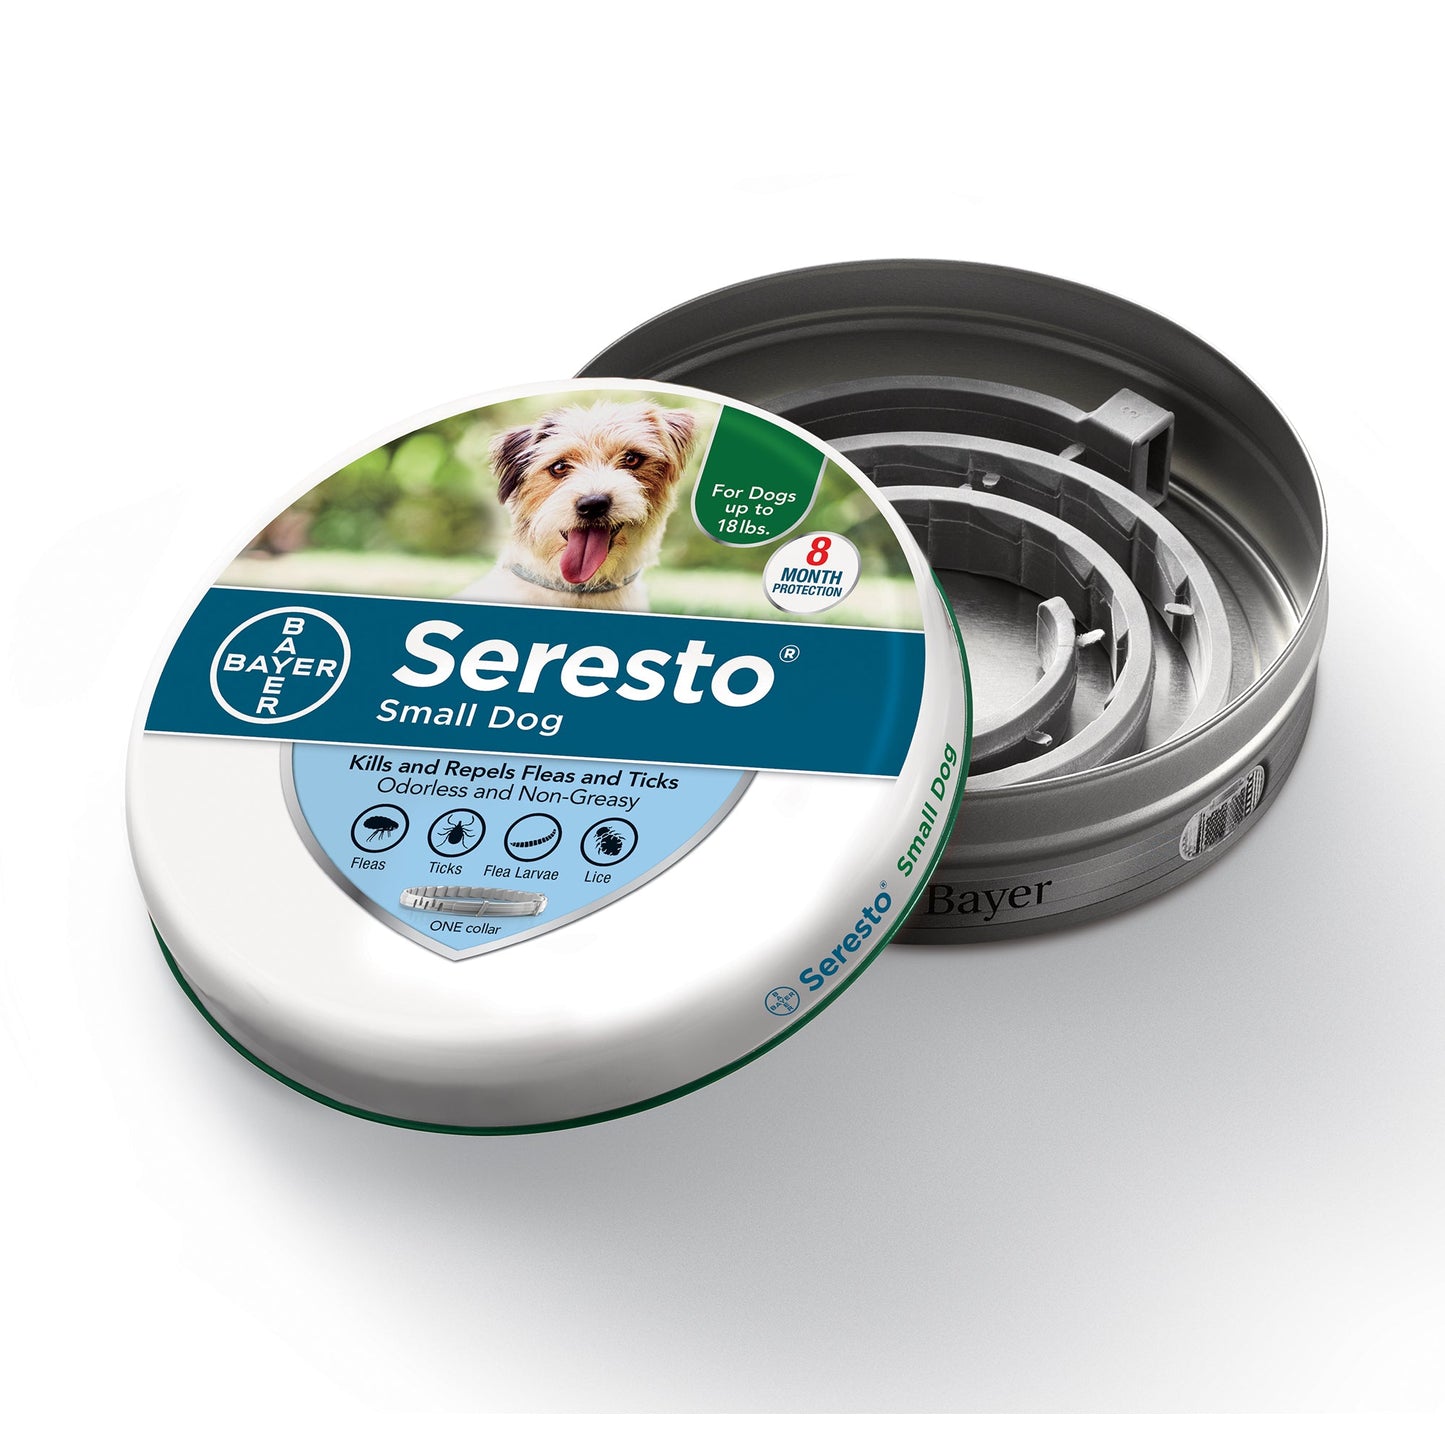 Seresto Small Dog, 8 month protection, up to 18lbs